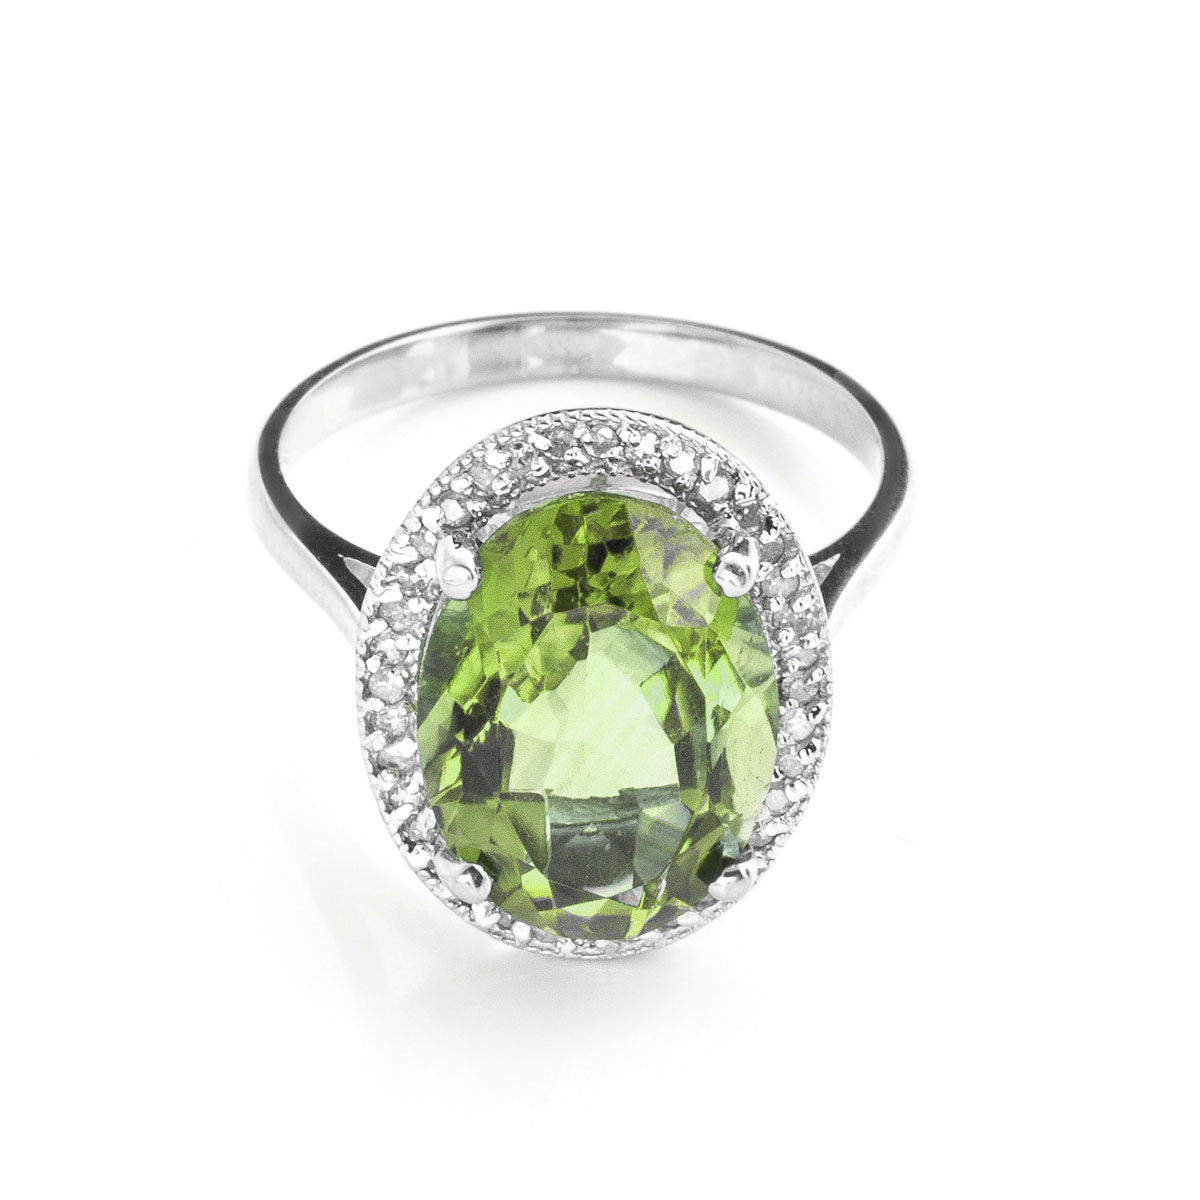 Green Amethyst Halo Ring 5.28 ctw in Sterling Silver